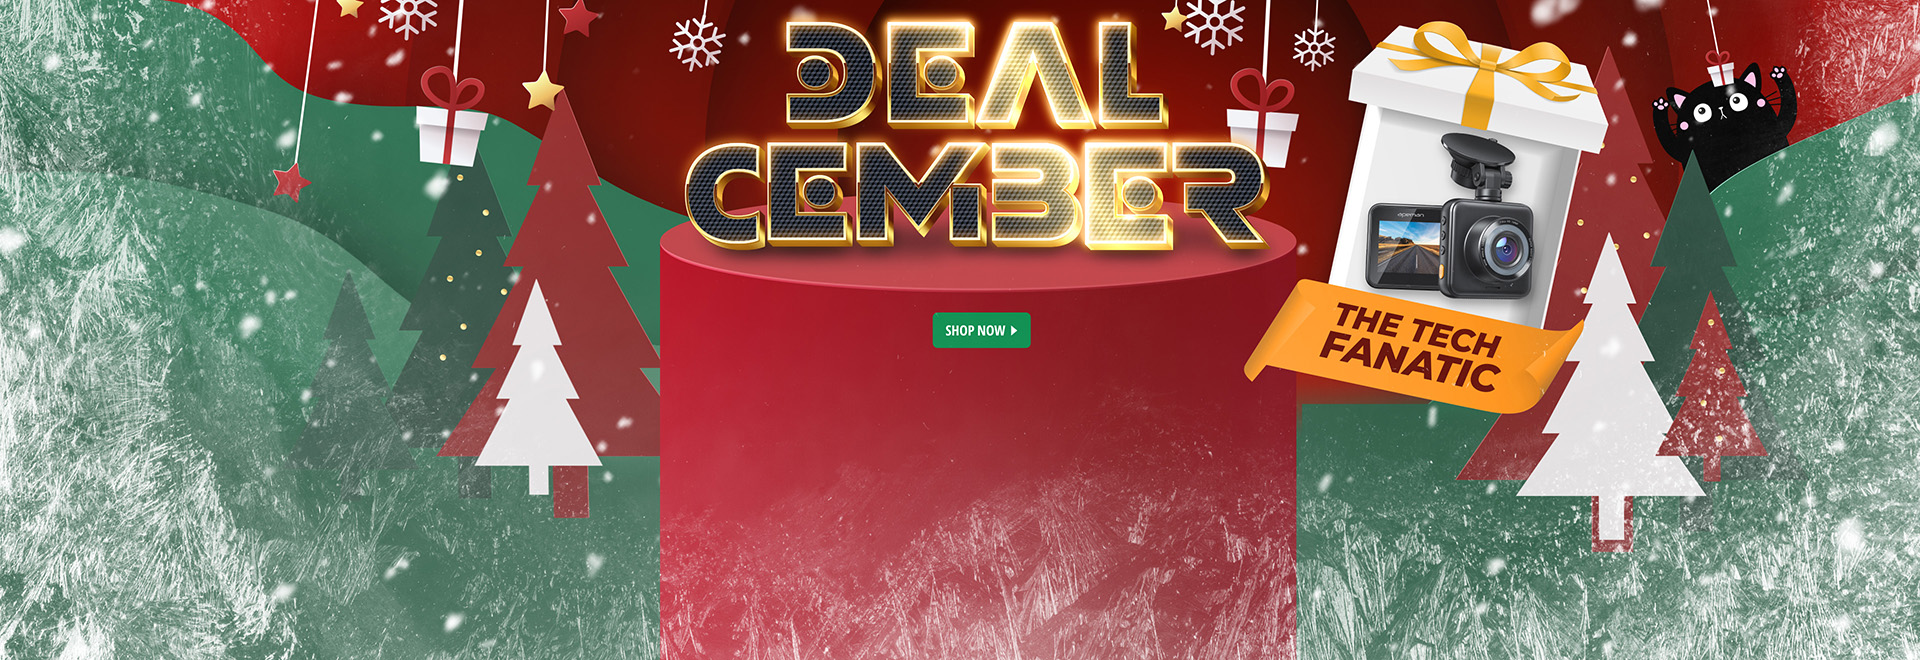 Deal-cember The Tech Fanatic